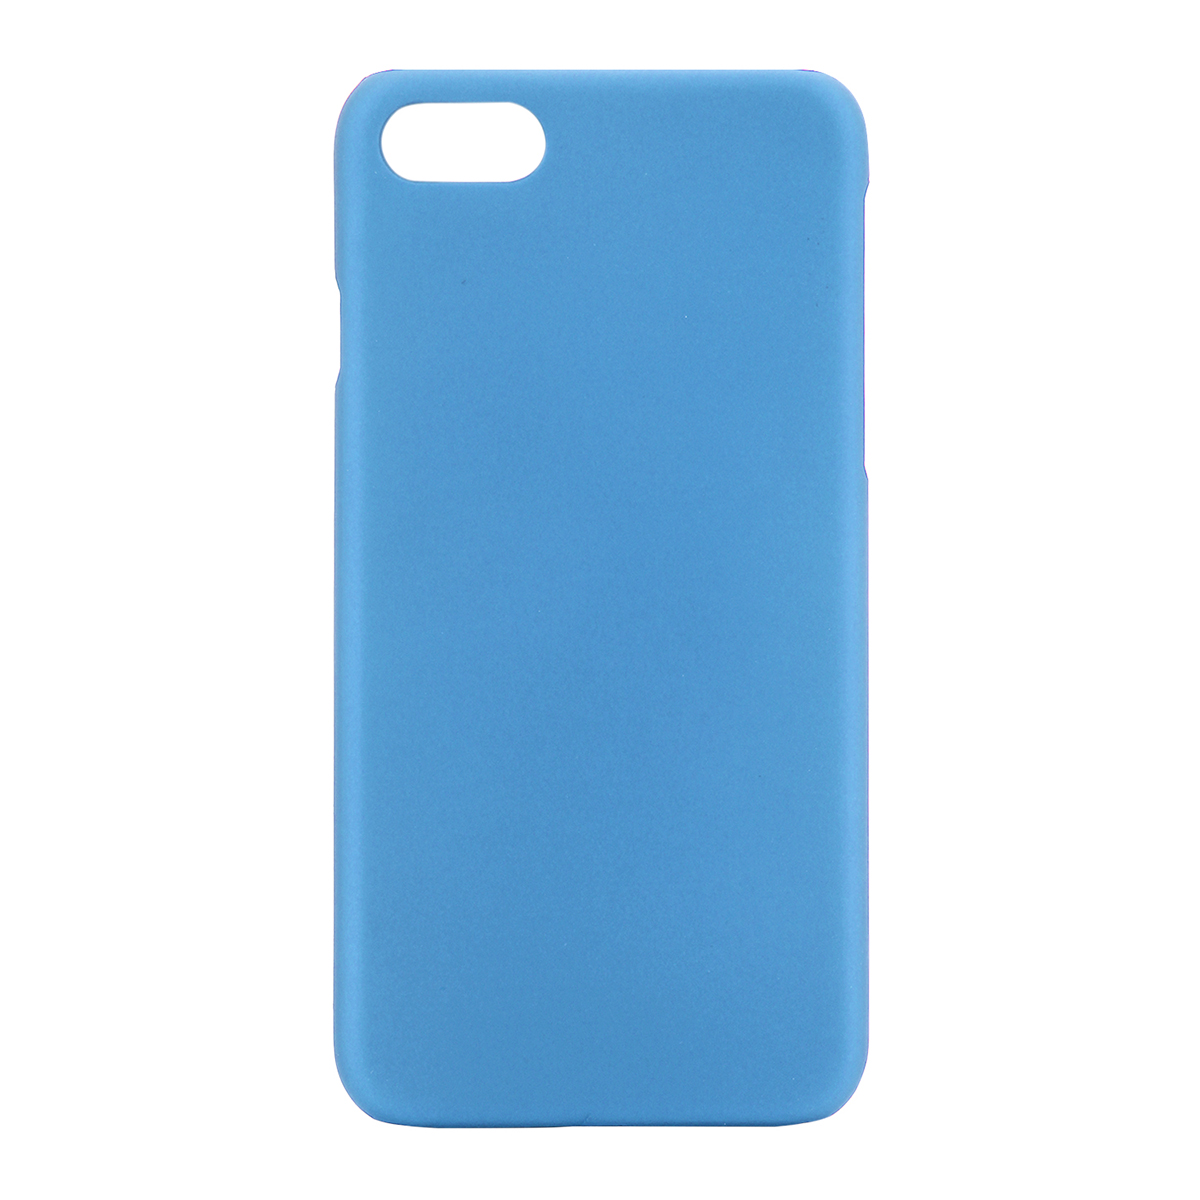 Multicolor Frosted Hard PC Protective Back Phone Case for iPhone 7 - Blue